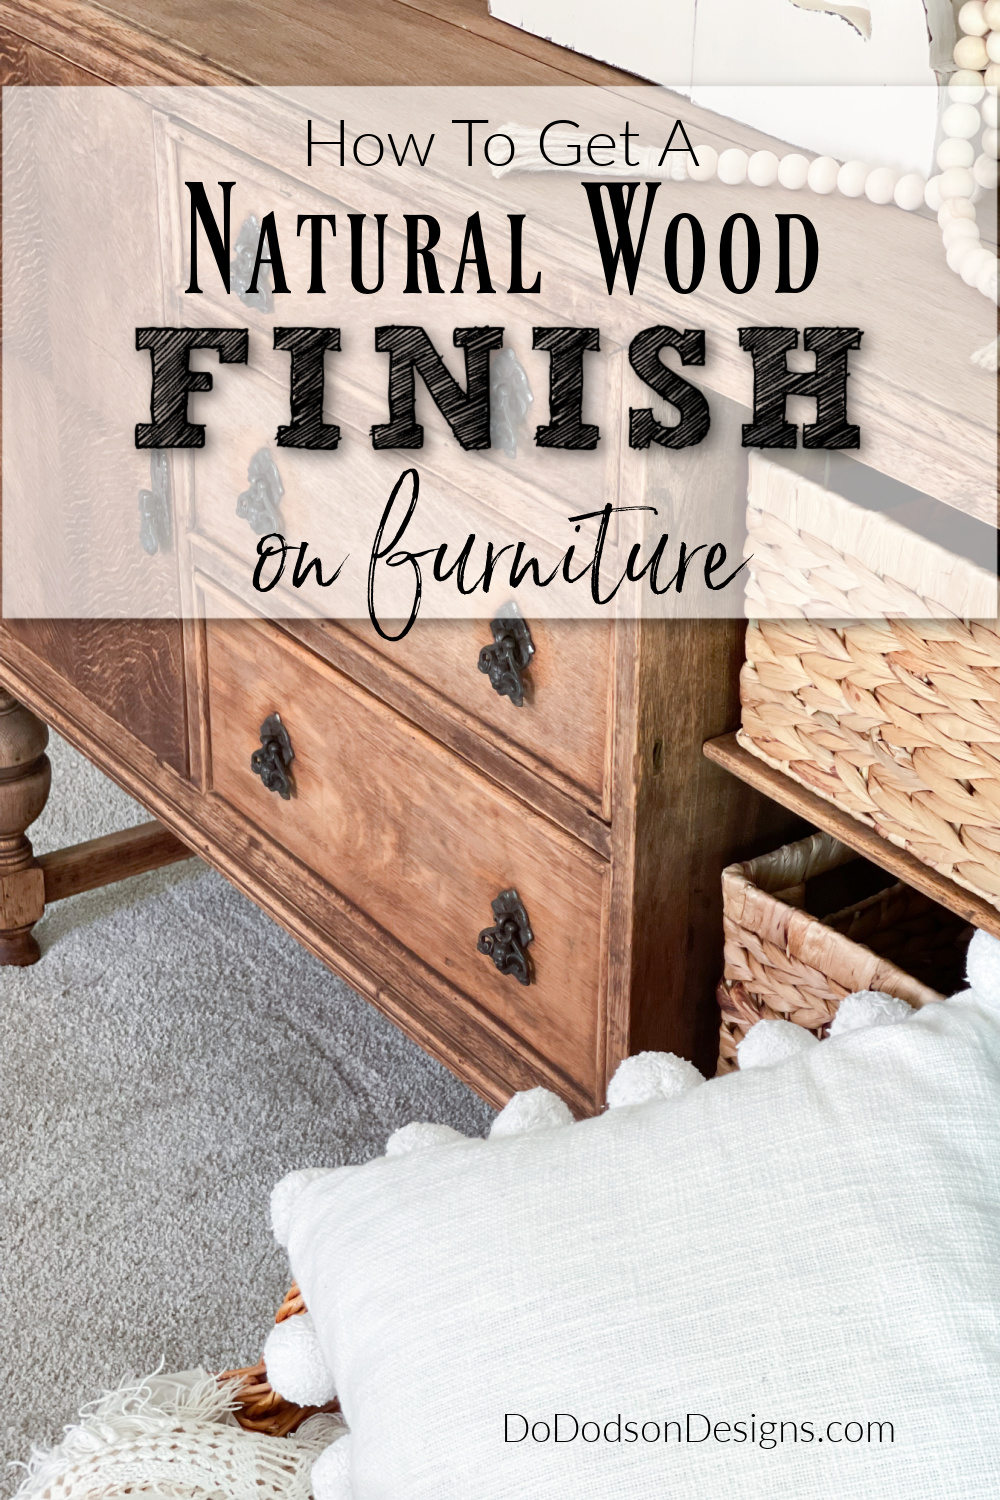 How To Get A Natural Wood Finish On Furniture